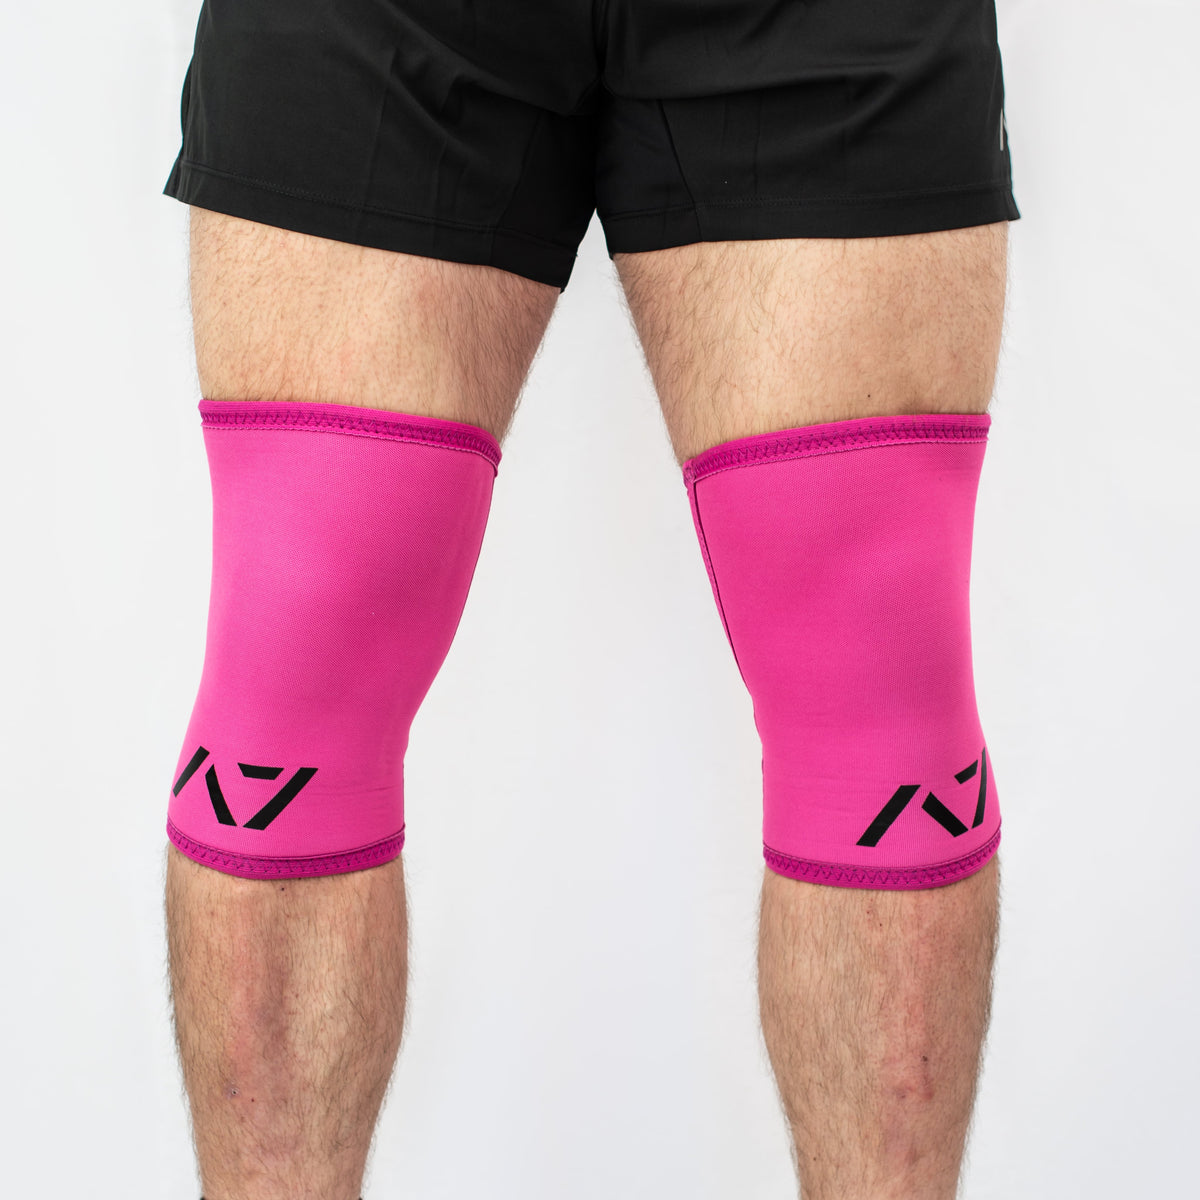 A7 IPF approved Pink CONE knee sleeves are structured with a downward cut panel on the back of the quad and calf to ensure ultimate compression at the knee joint. A7 CONE knee sleeves are IPF approved for use in all powerlifting competitions. A7 CONE Knee Sleeves are IPF Approved Kit. A7 cone knee sleeves are made with high quality neoprene and the knee sleeves are sold as a pair. The double seam on the knee sleeves create a greater tension on the knee joint. A7 UK shipping to UK and Europe. 